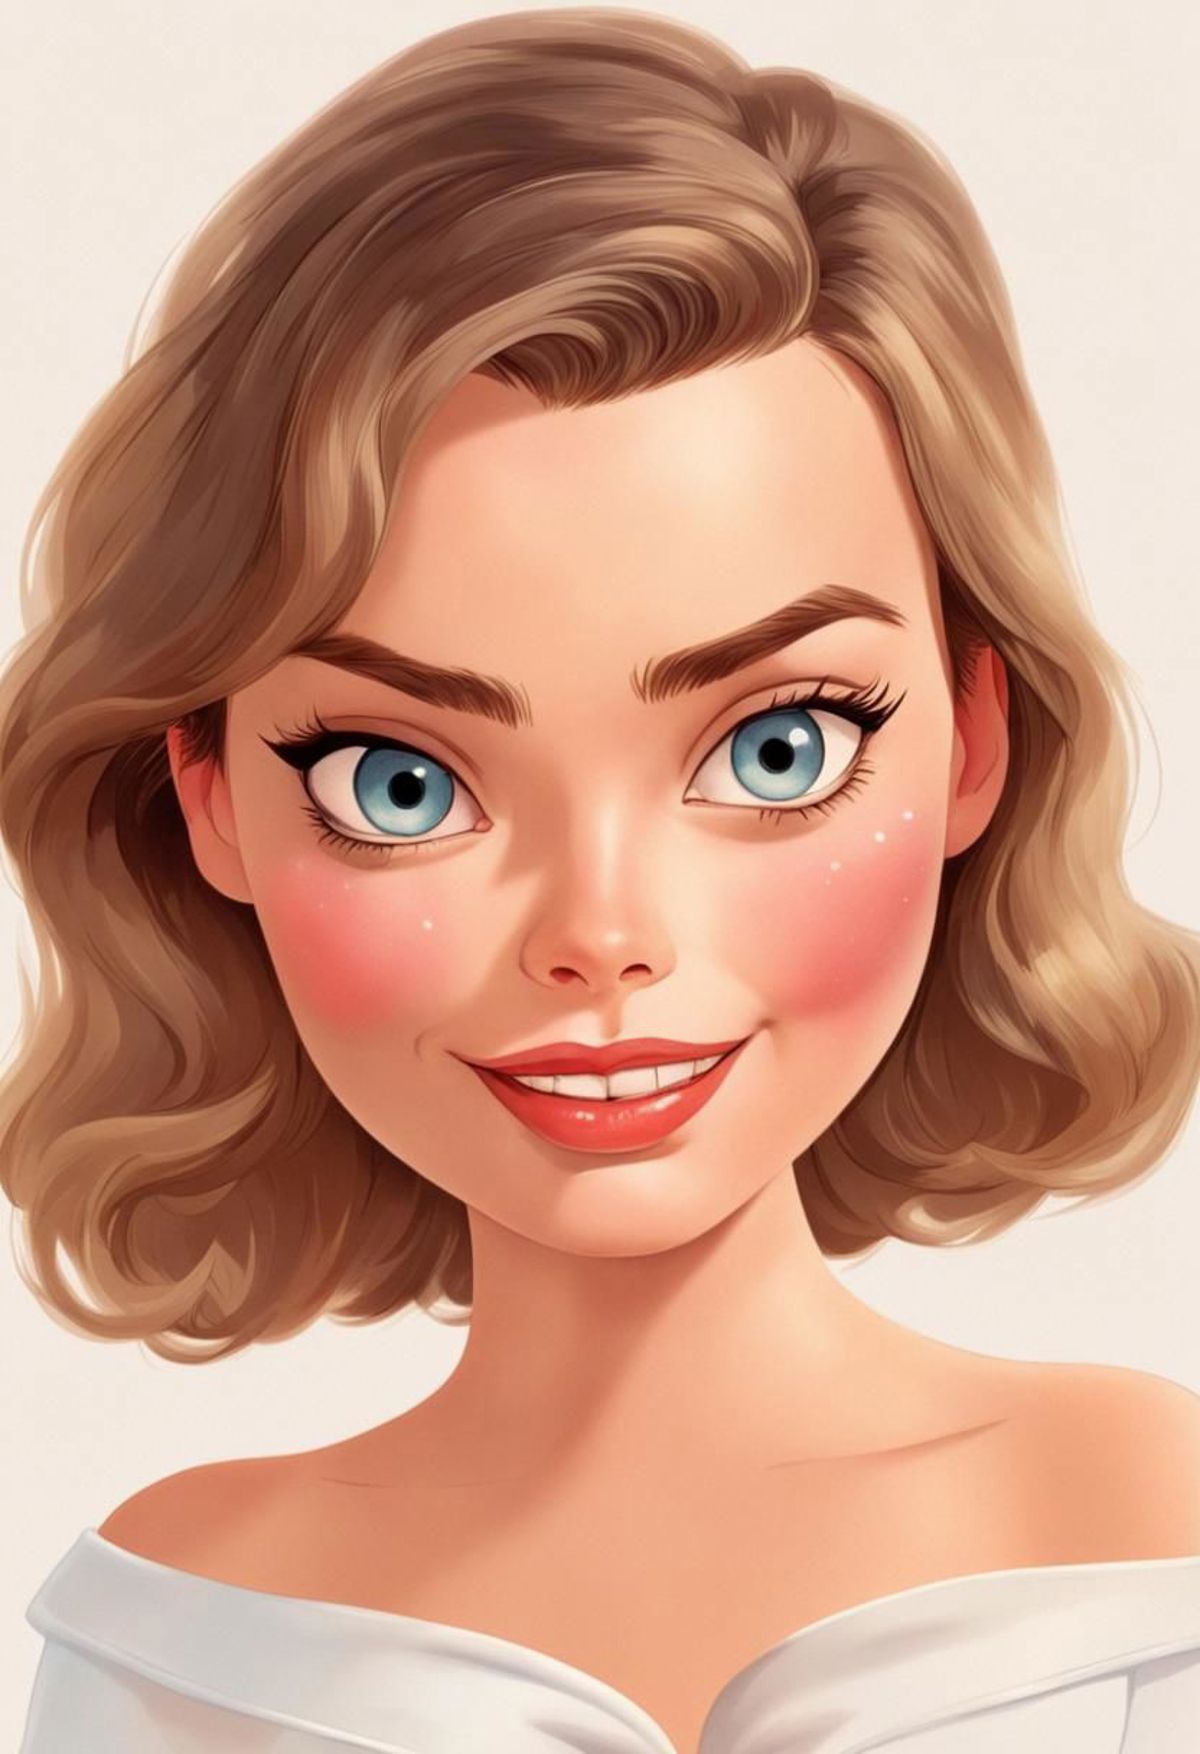 3D Animation Style SDXL image by TheJagStudio